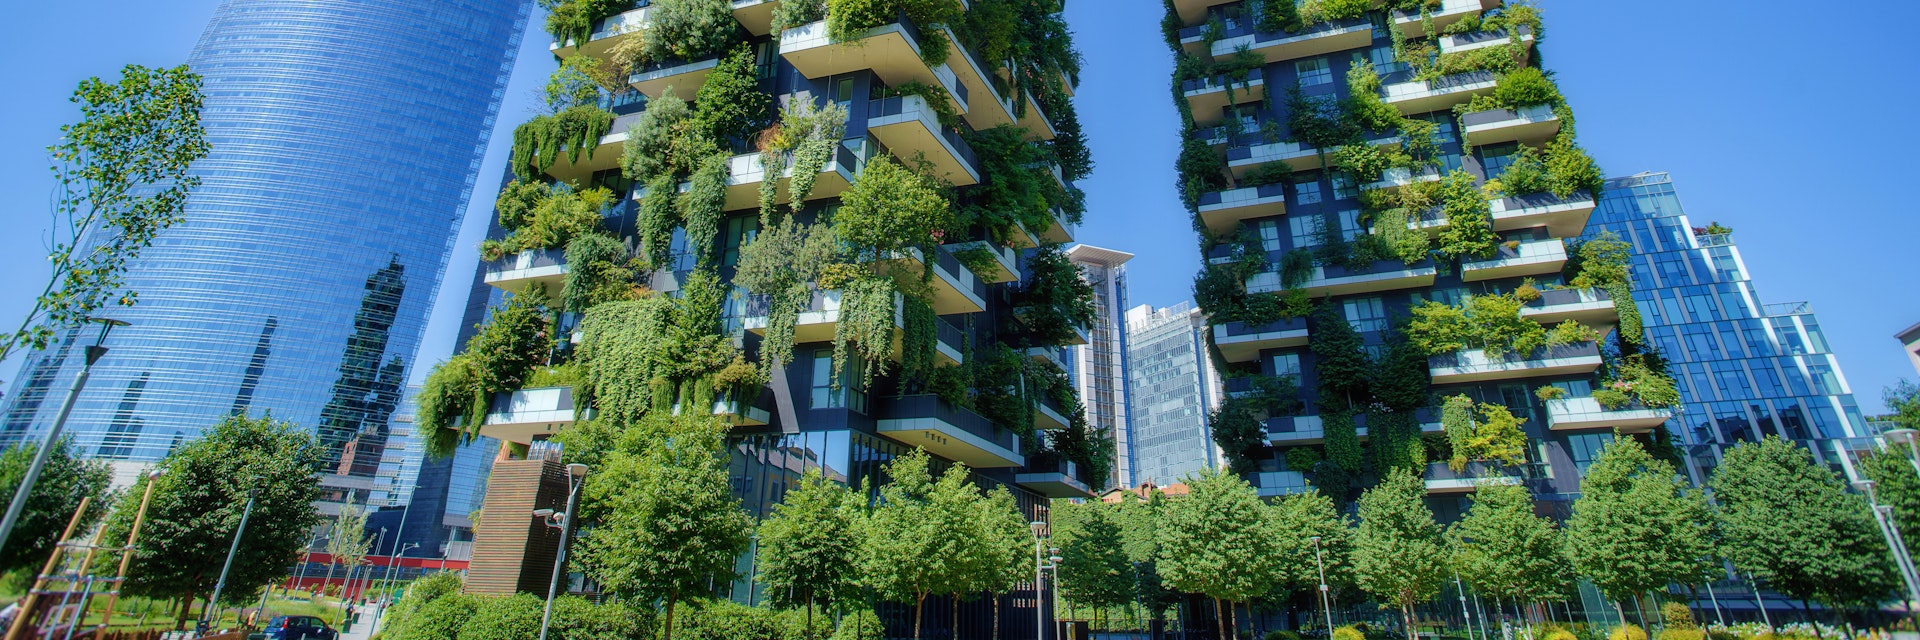 Milan, Italy - June 16, 2019: Bosco Verticale (Vertical Forest) in Milan city, Italy
1162611723